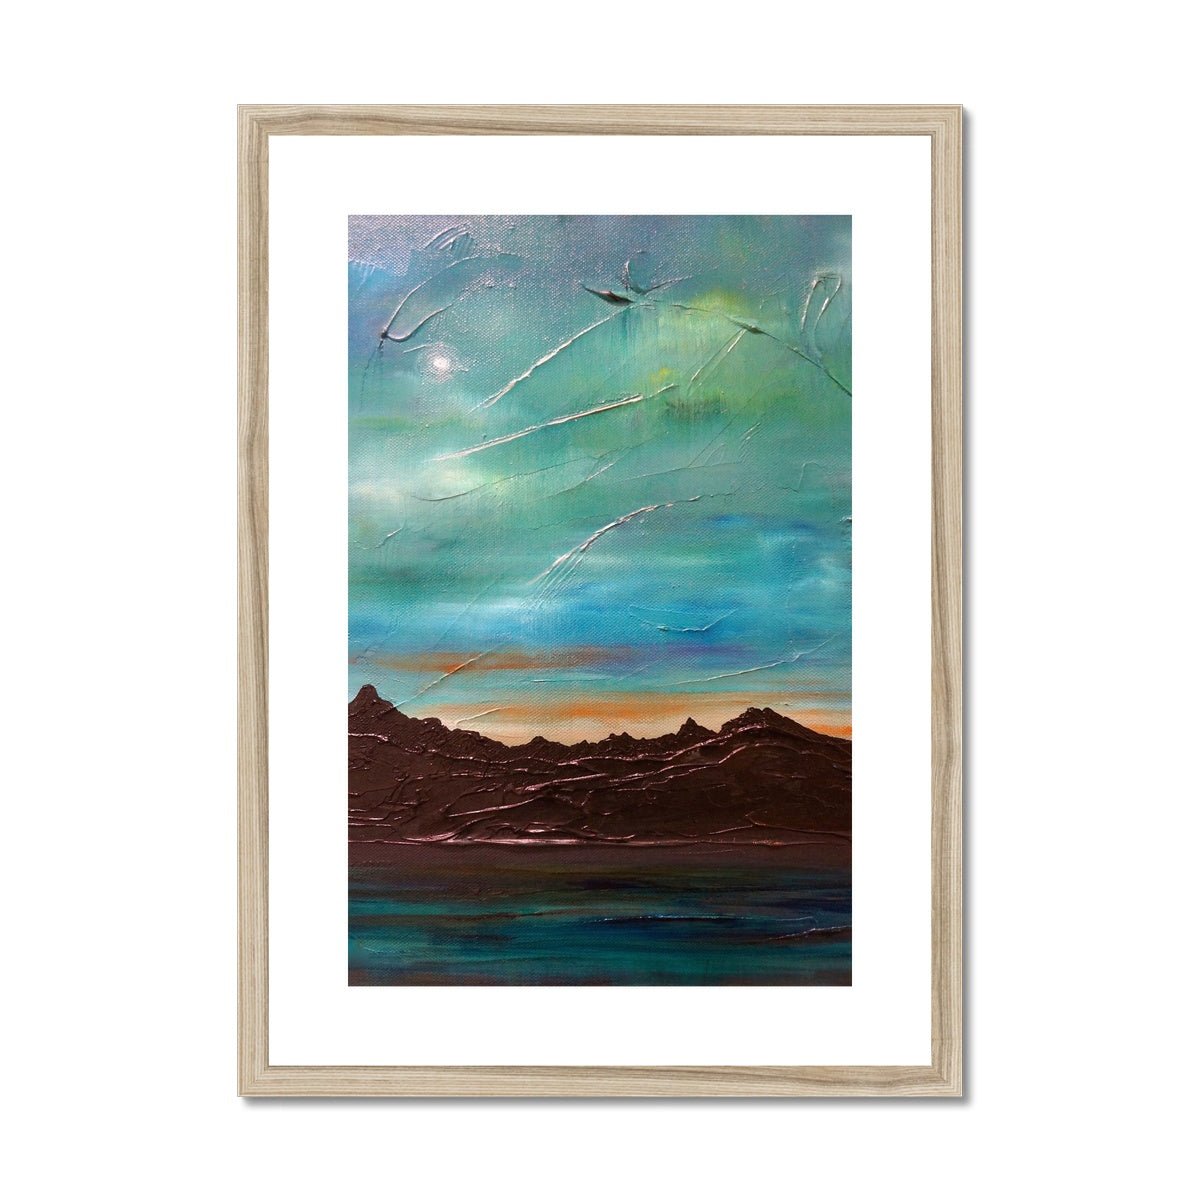 The Cuillin From Elgol Skye Painting | Framed & Mounted Prints From Scotland-Framed & Mounted Prints-Skye Art Gallery-A2 Portrait-Natural Frame-Paintings, Prints, Homeware, Art Gifts From Scotland By Scottish Artist Kevin Hunter